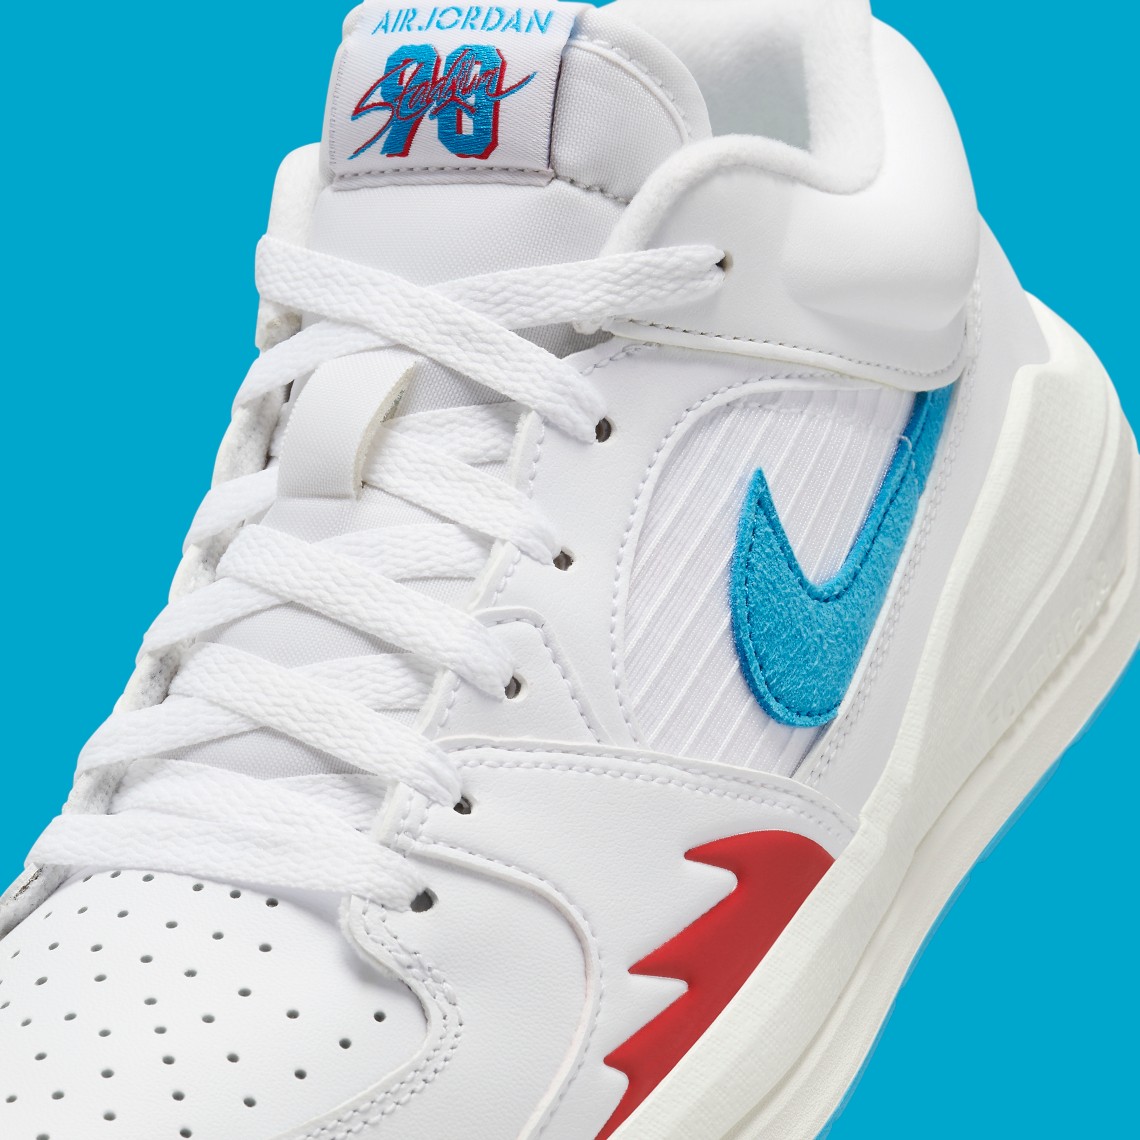 First Look at a New Air Jordan 1 High Celebrating Mikes Blue White Red Fb2269 100 4